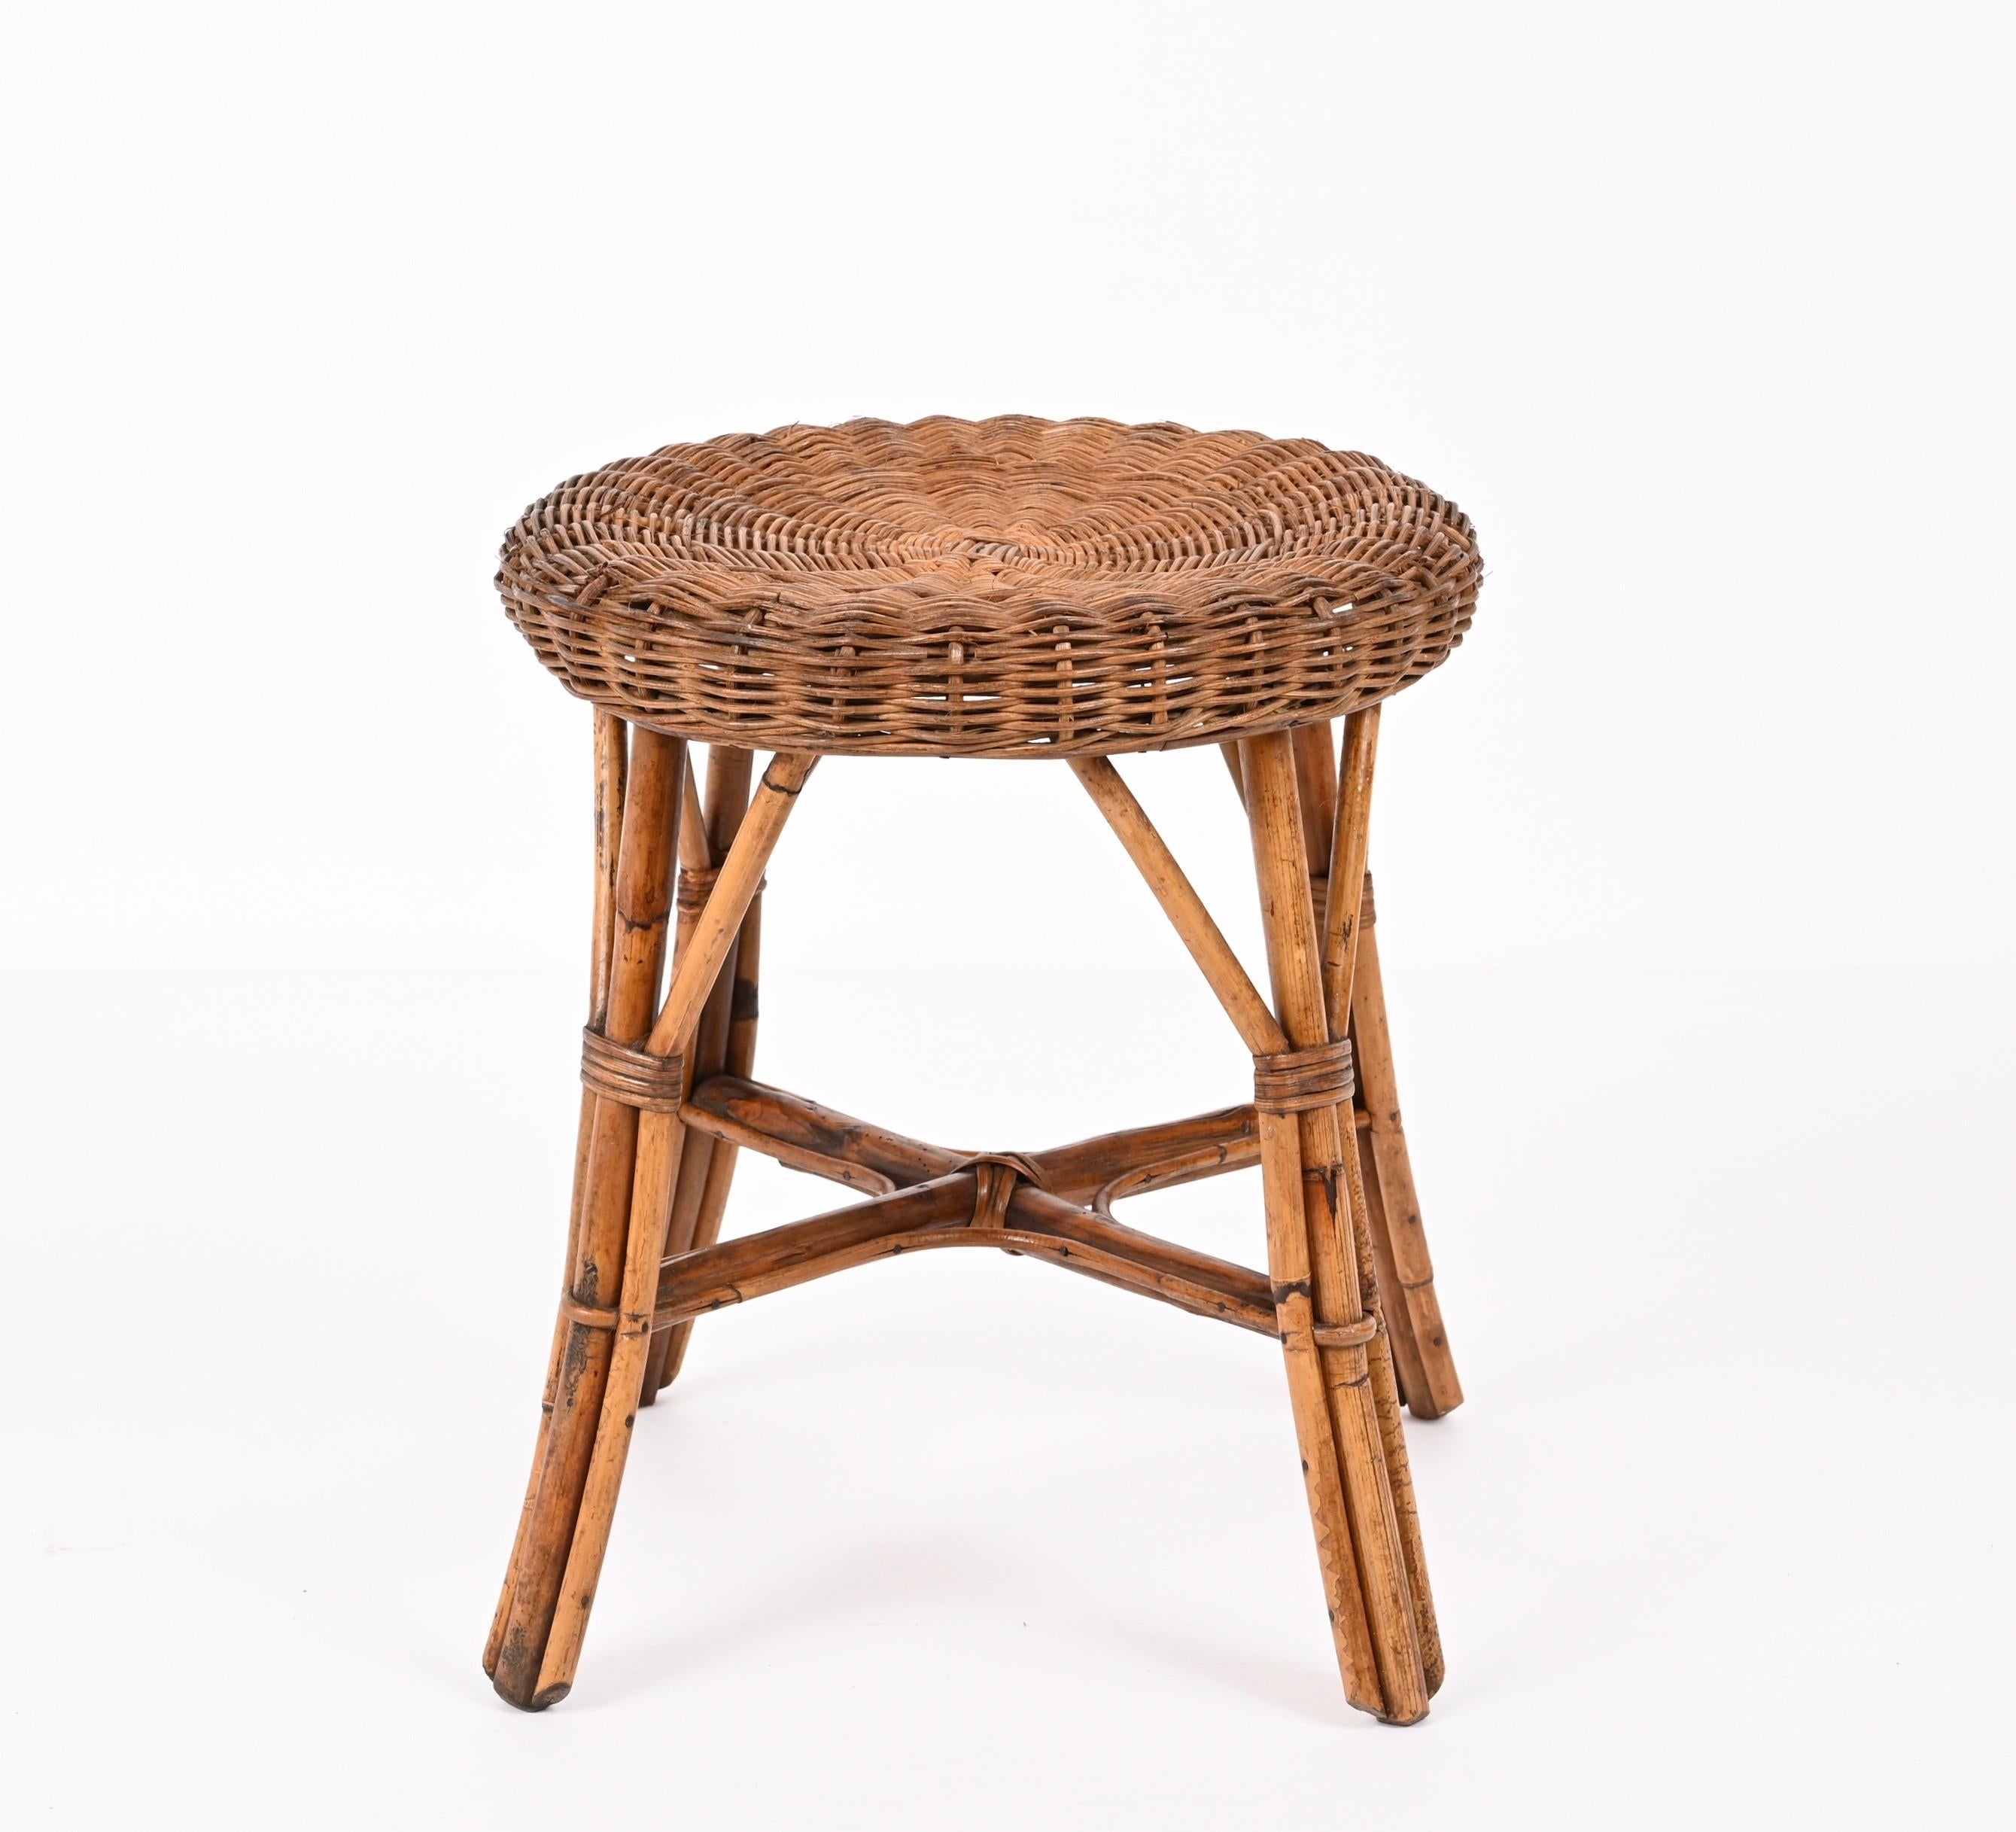 Mid-century rattan and bamboo stool. This stool was designed in Italy during the 1960s.

The extraordinary architectural ideas emerge in their purity and poetry of form, decorating the solid and strong bamboo structure.

This item is very well